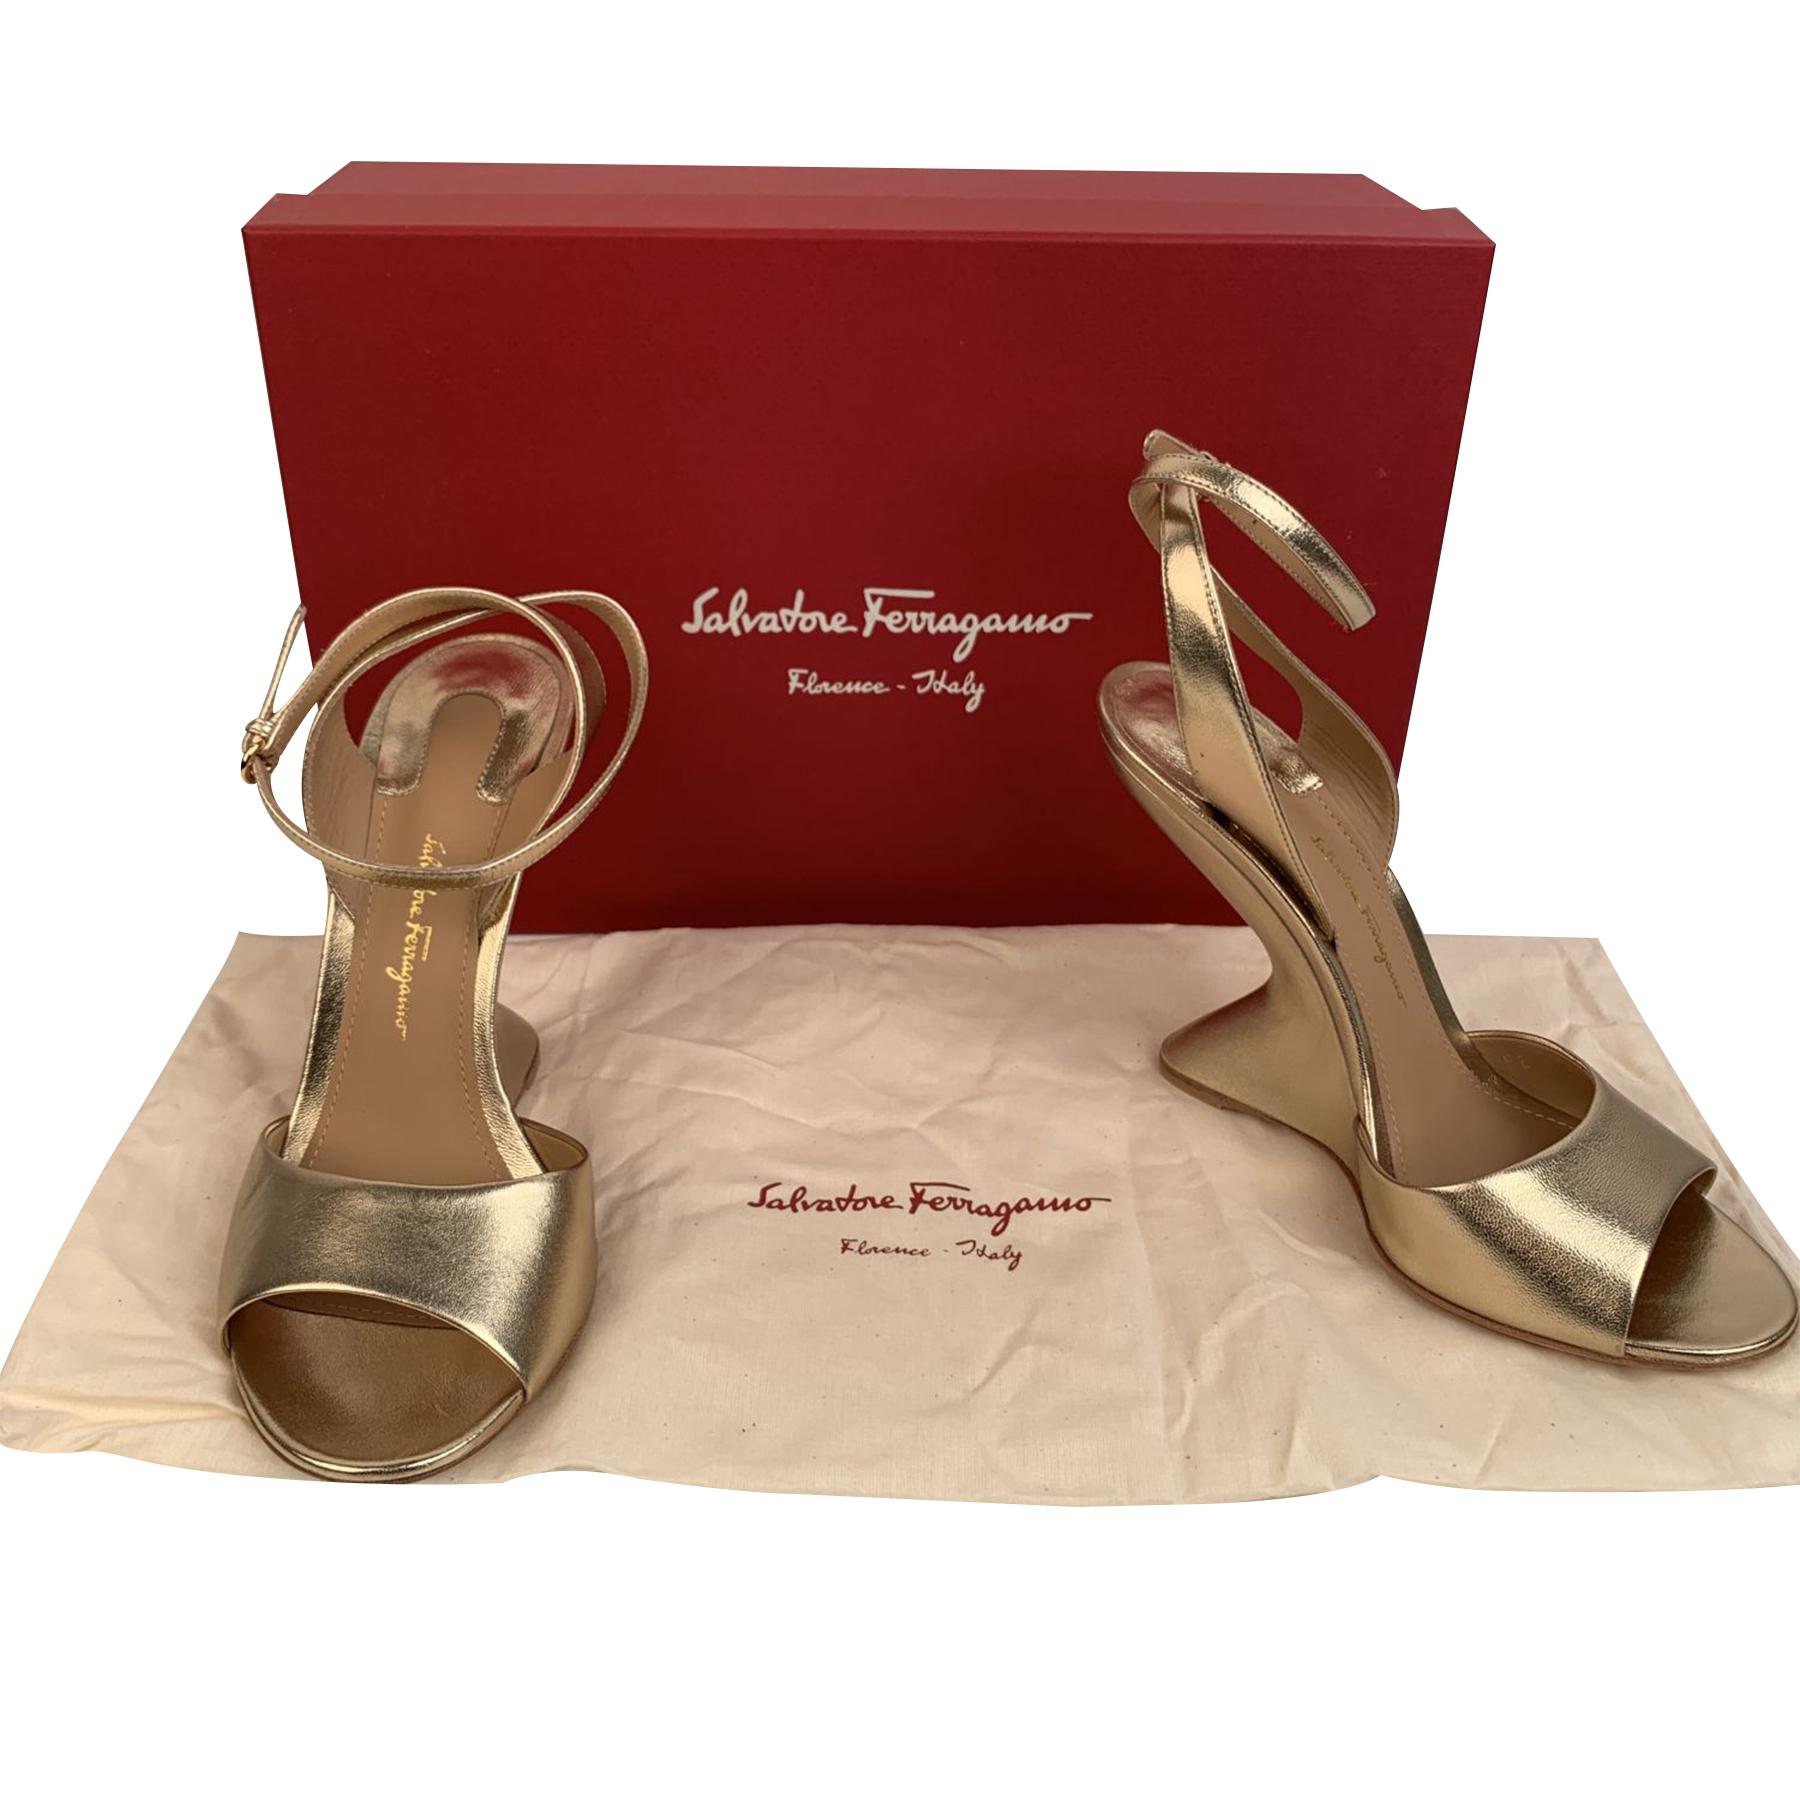 Elegant Salvatore Ferragamo 'Arsina 105' wedge sandals. Crafted in gold metal leather. They feature open toe, high sculpted wedge heel and ankle strap with adjustable buckle. Made in Italy. Heels Height: 4.1 inches - 10.5 cm. Size: US 7 C - EU 37.5